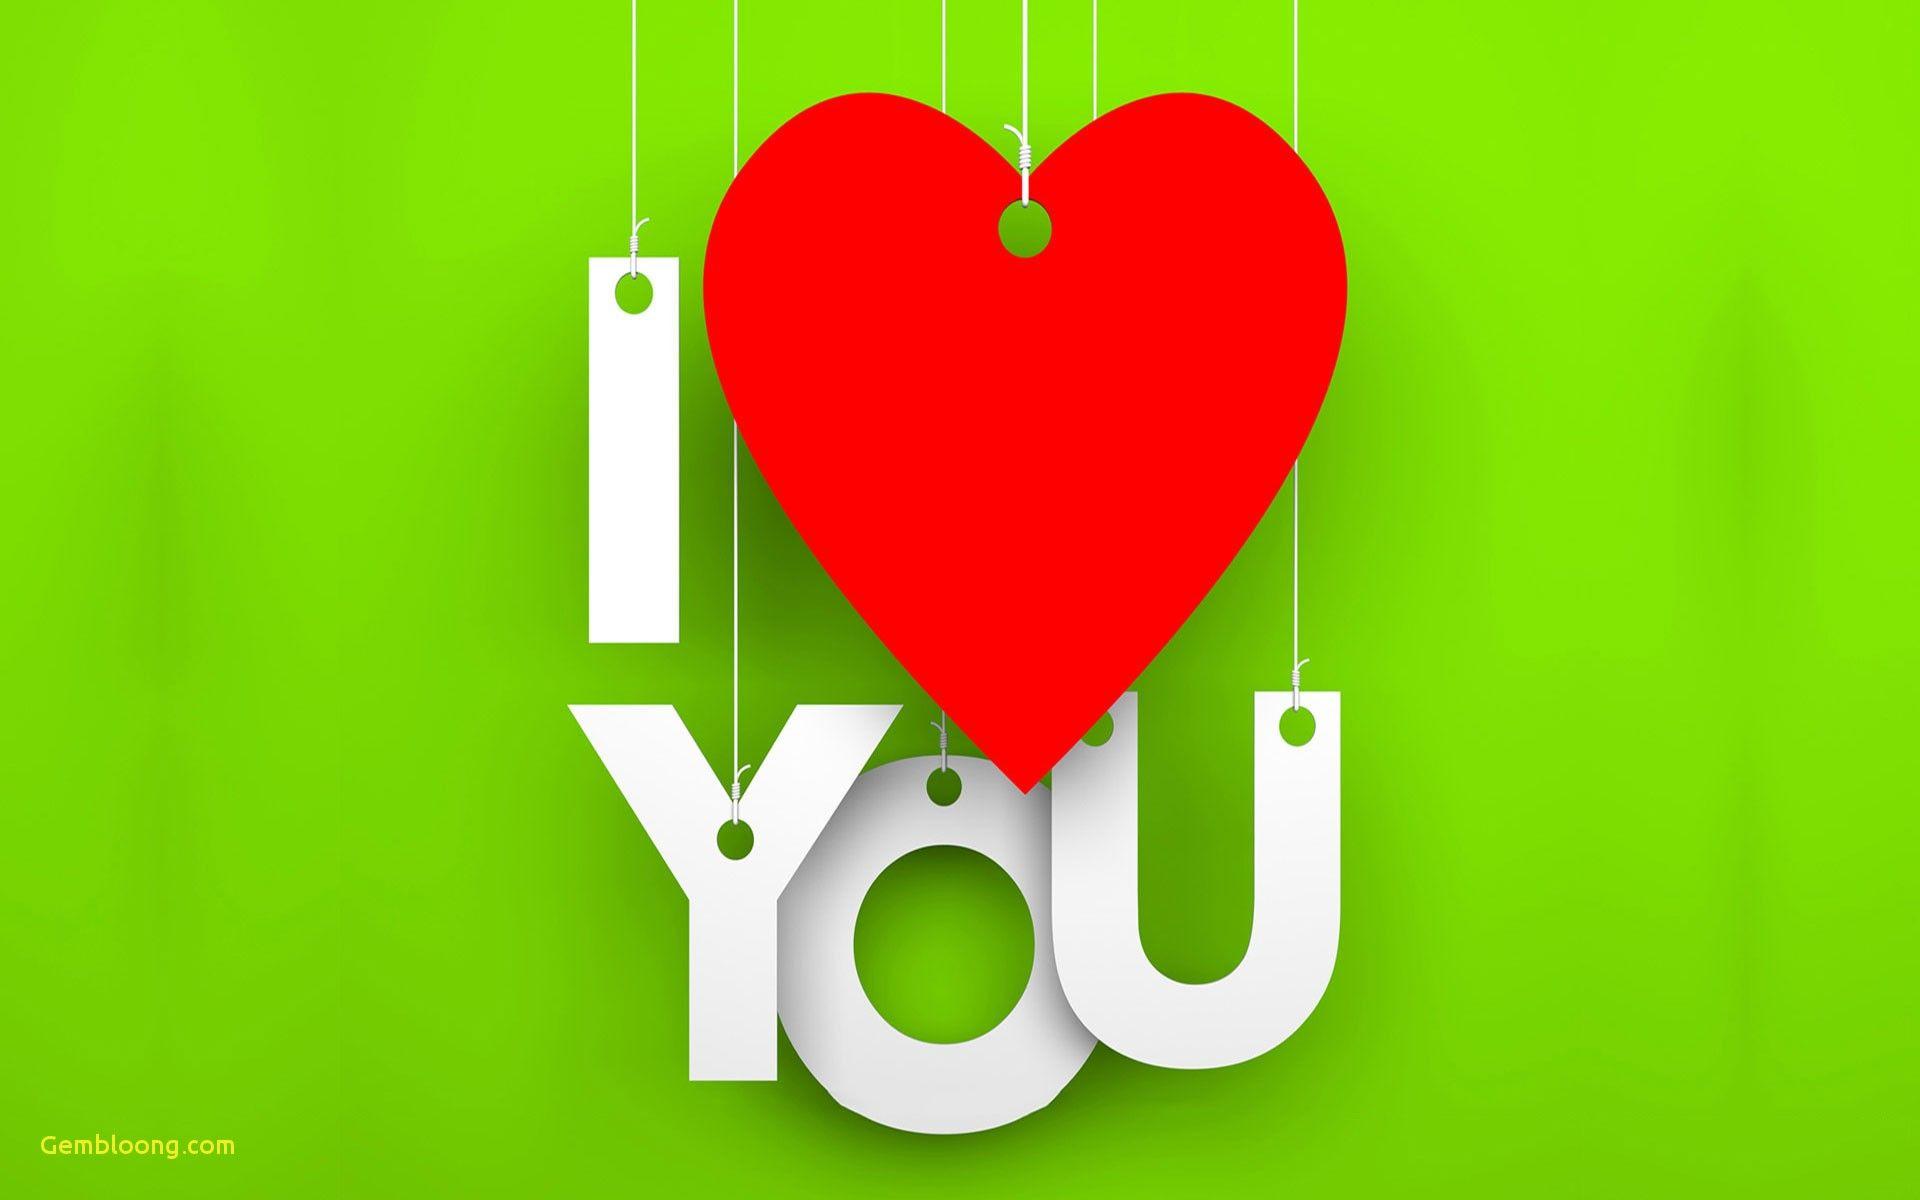 Hd Wallpaper Of 3D Heart Awesome Love U Wallpaper Group with 27